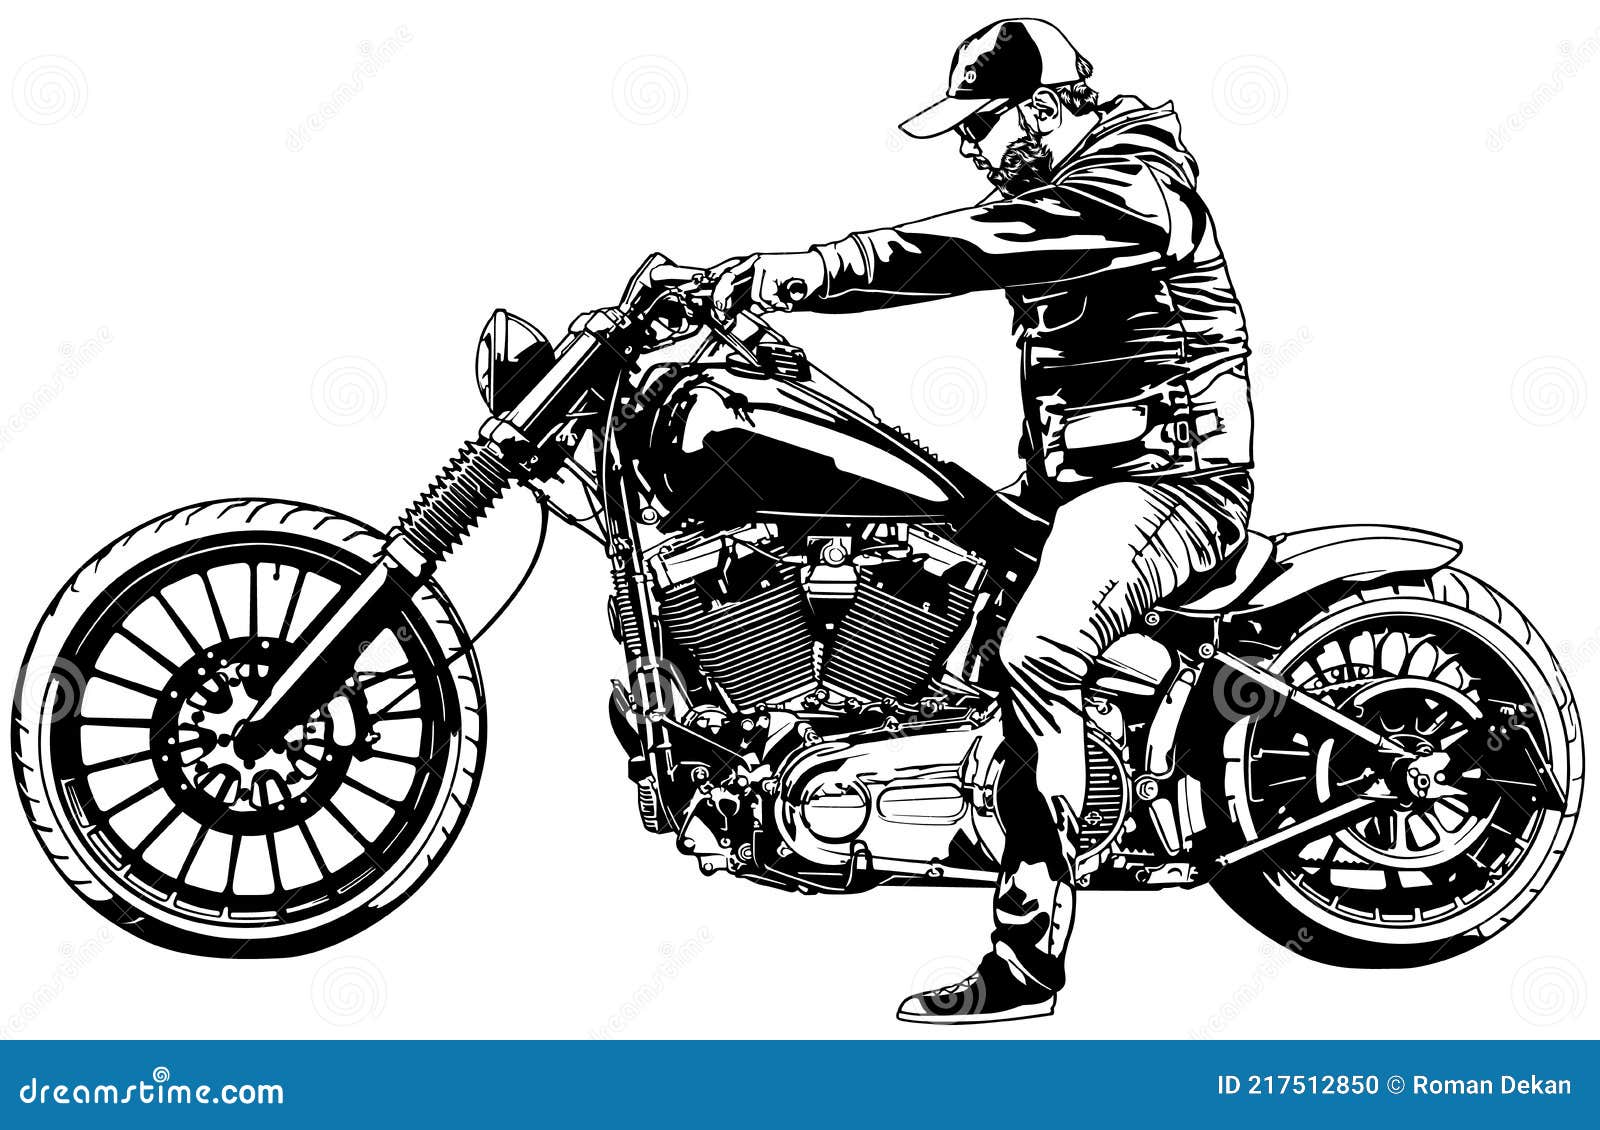 motorcyclist on motorcycle drawing